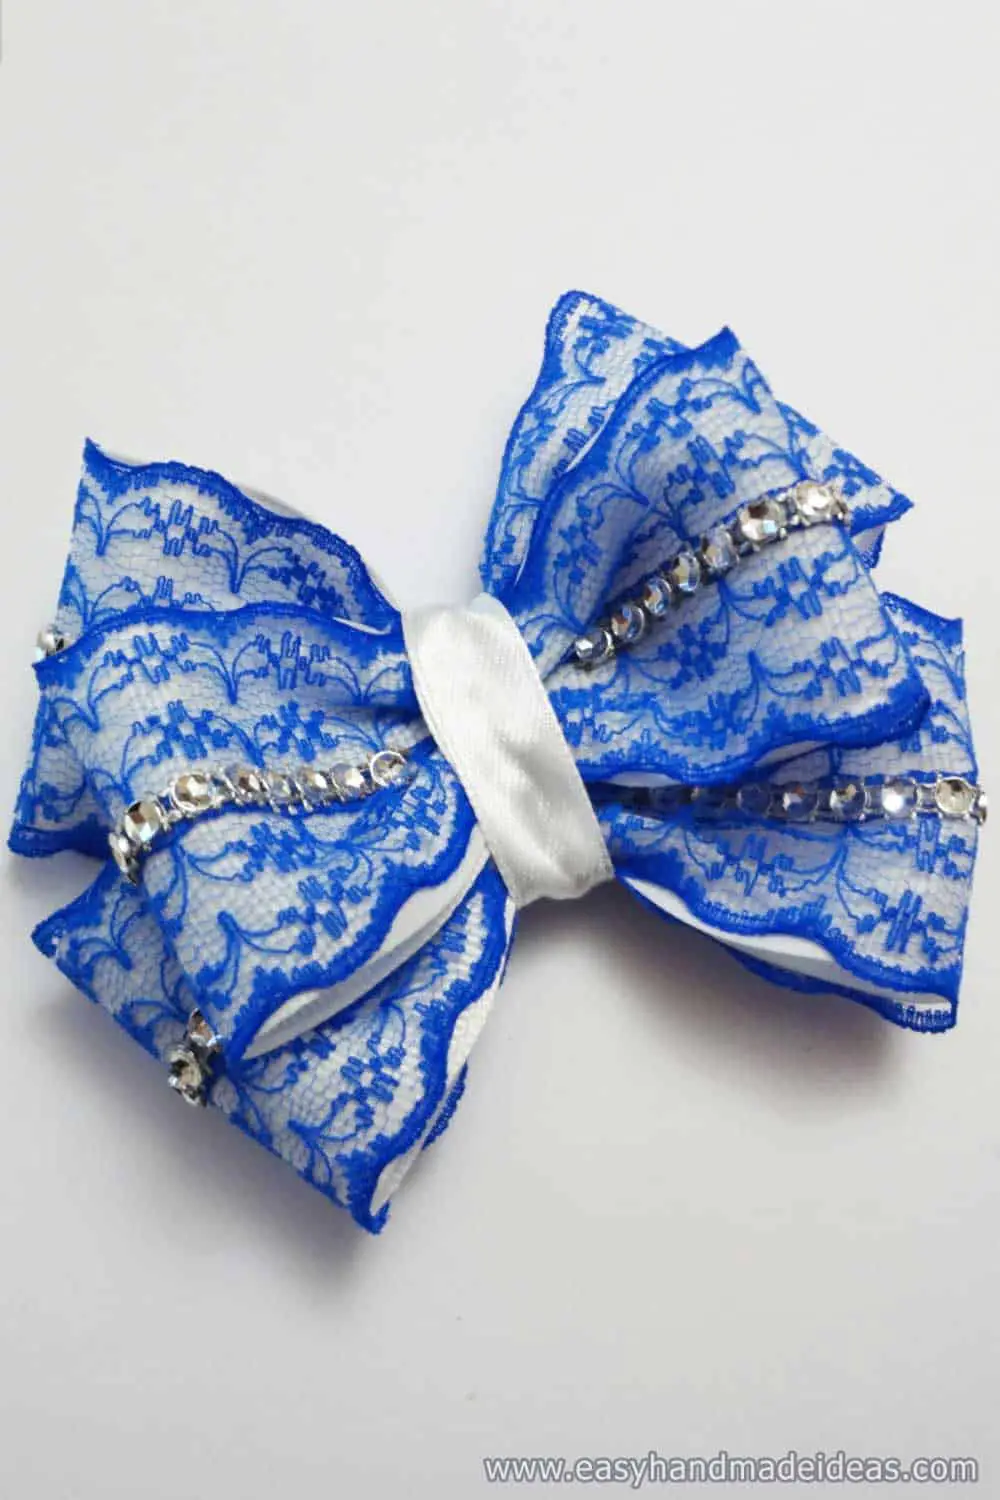 The Bow with a thin Satin Ribbon